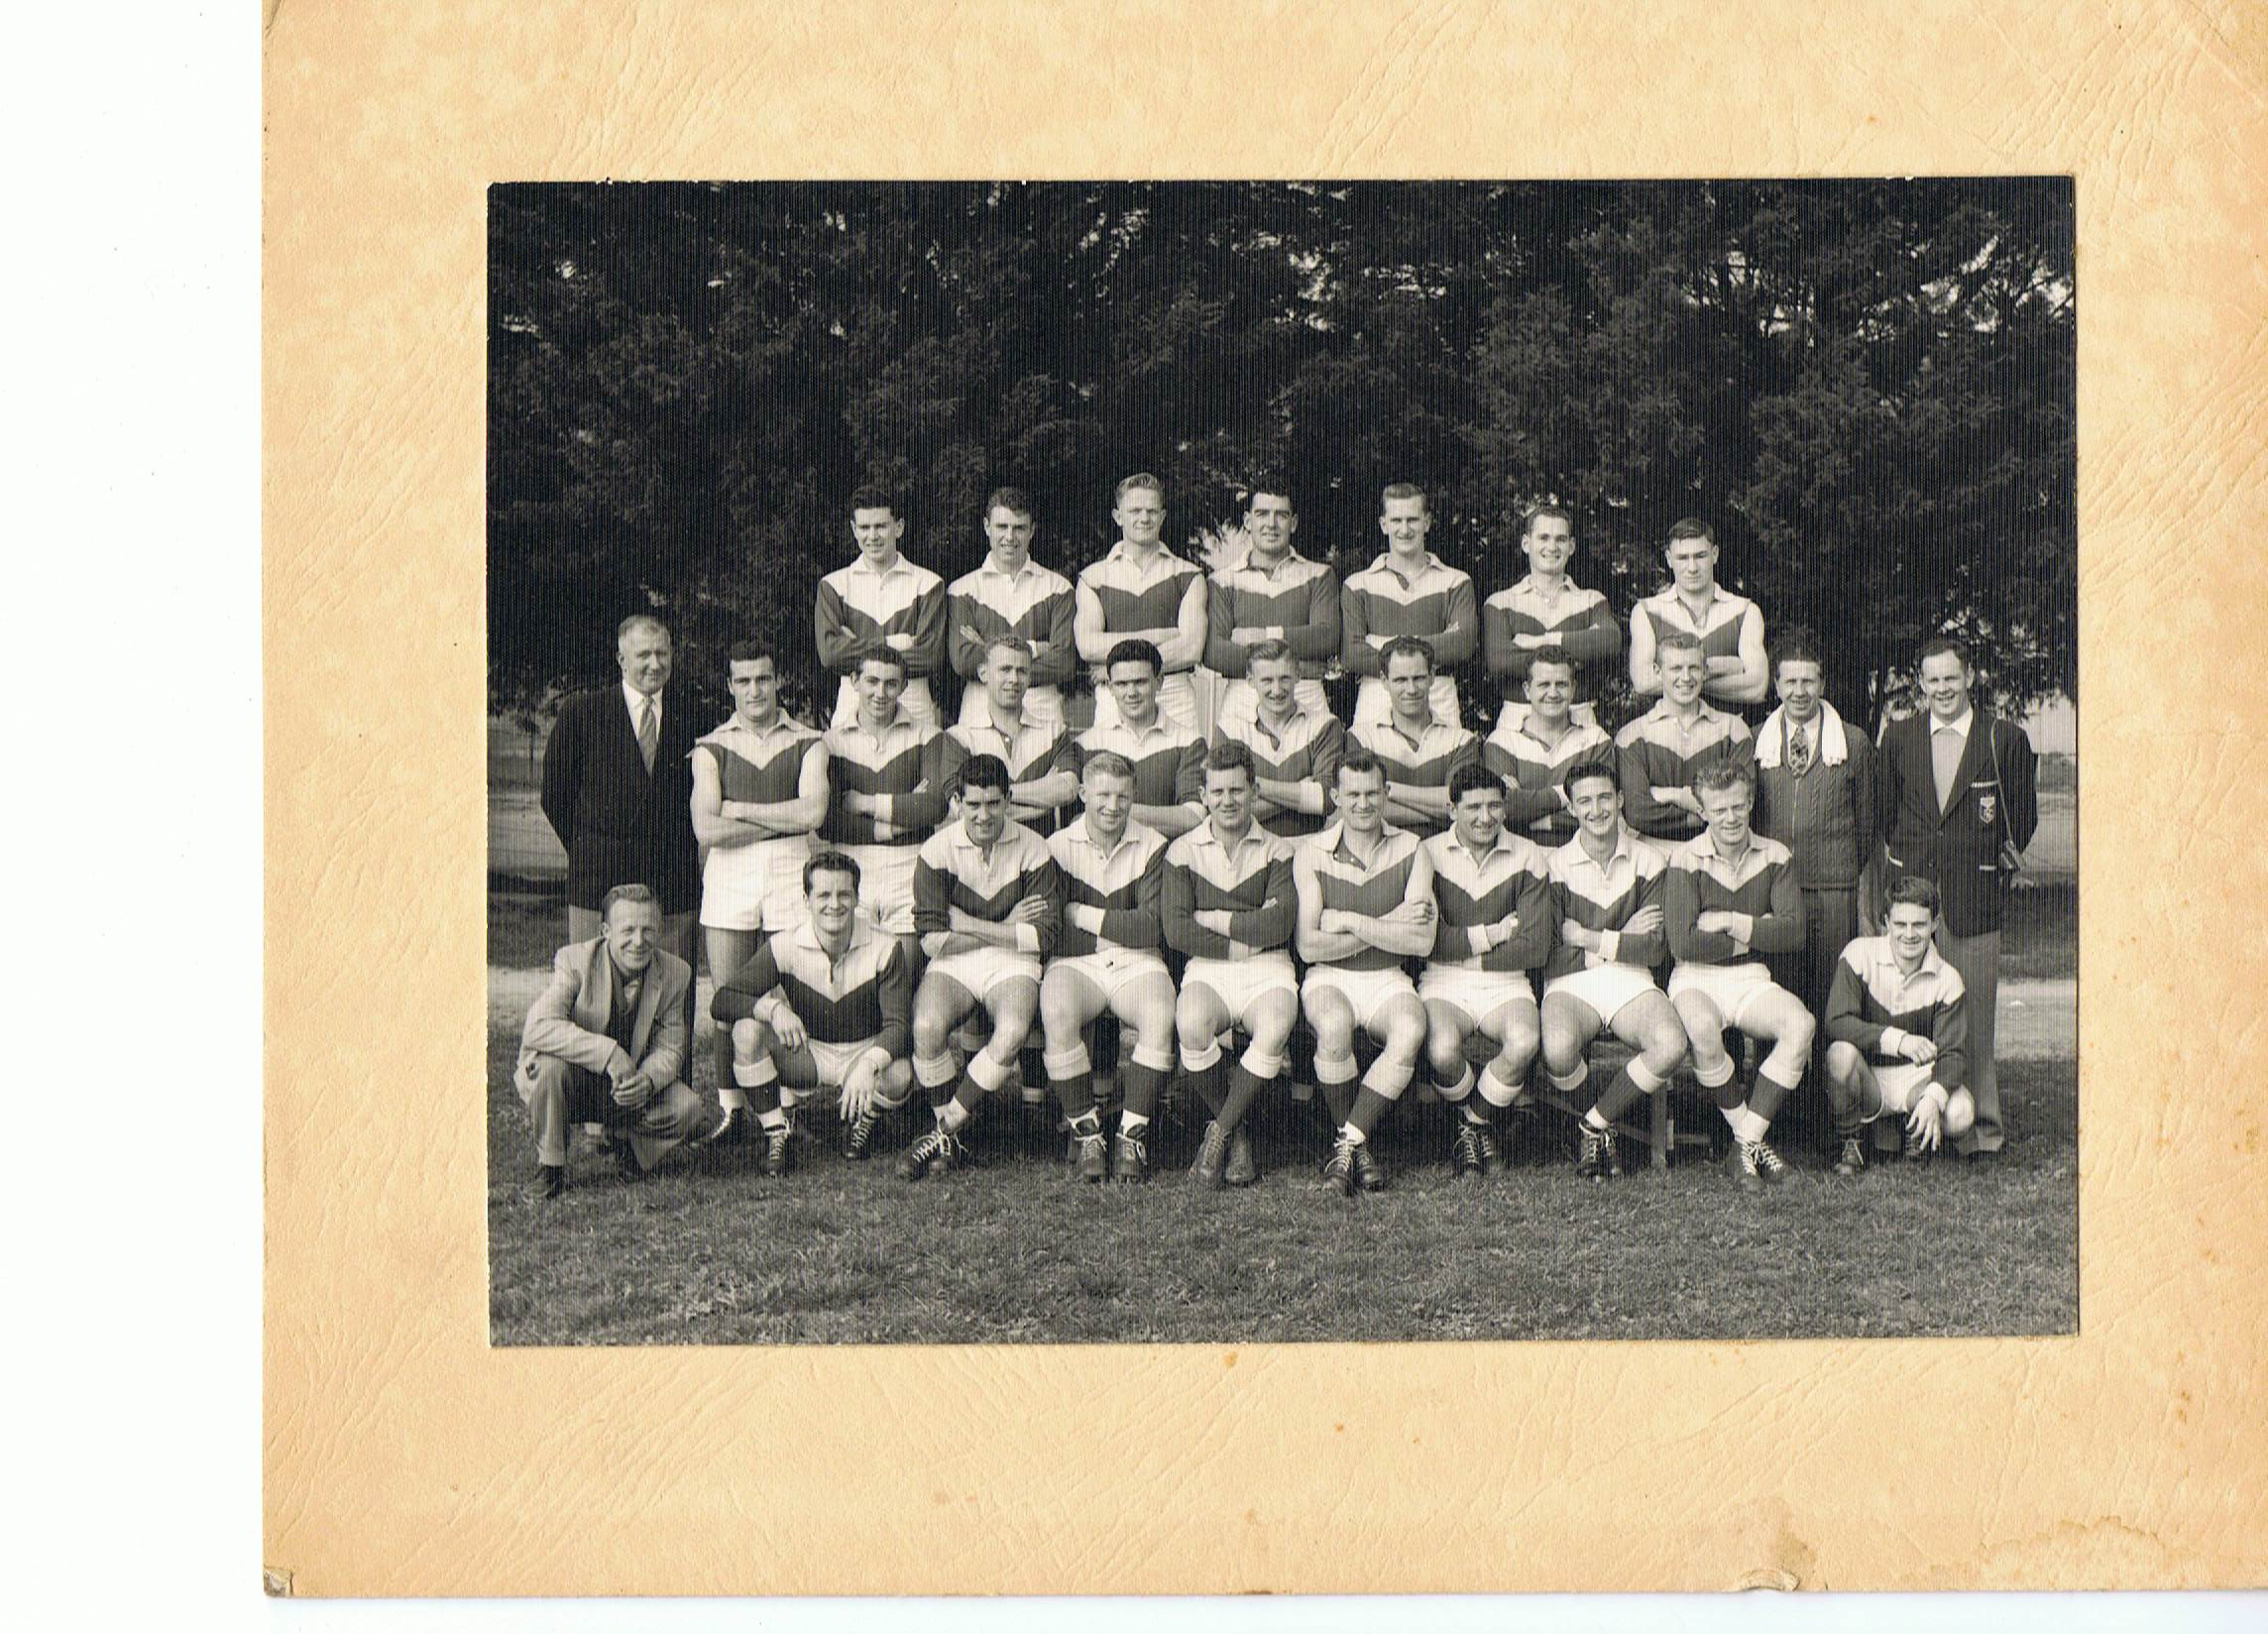 Image of players at Reservoir Football Clun